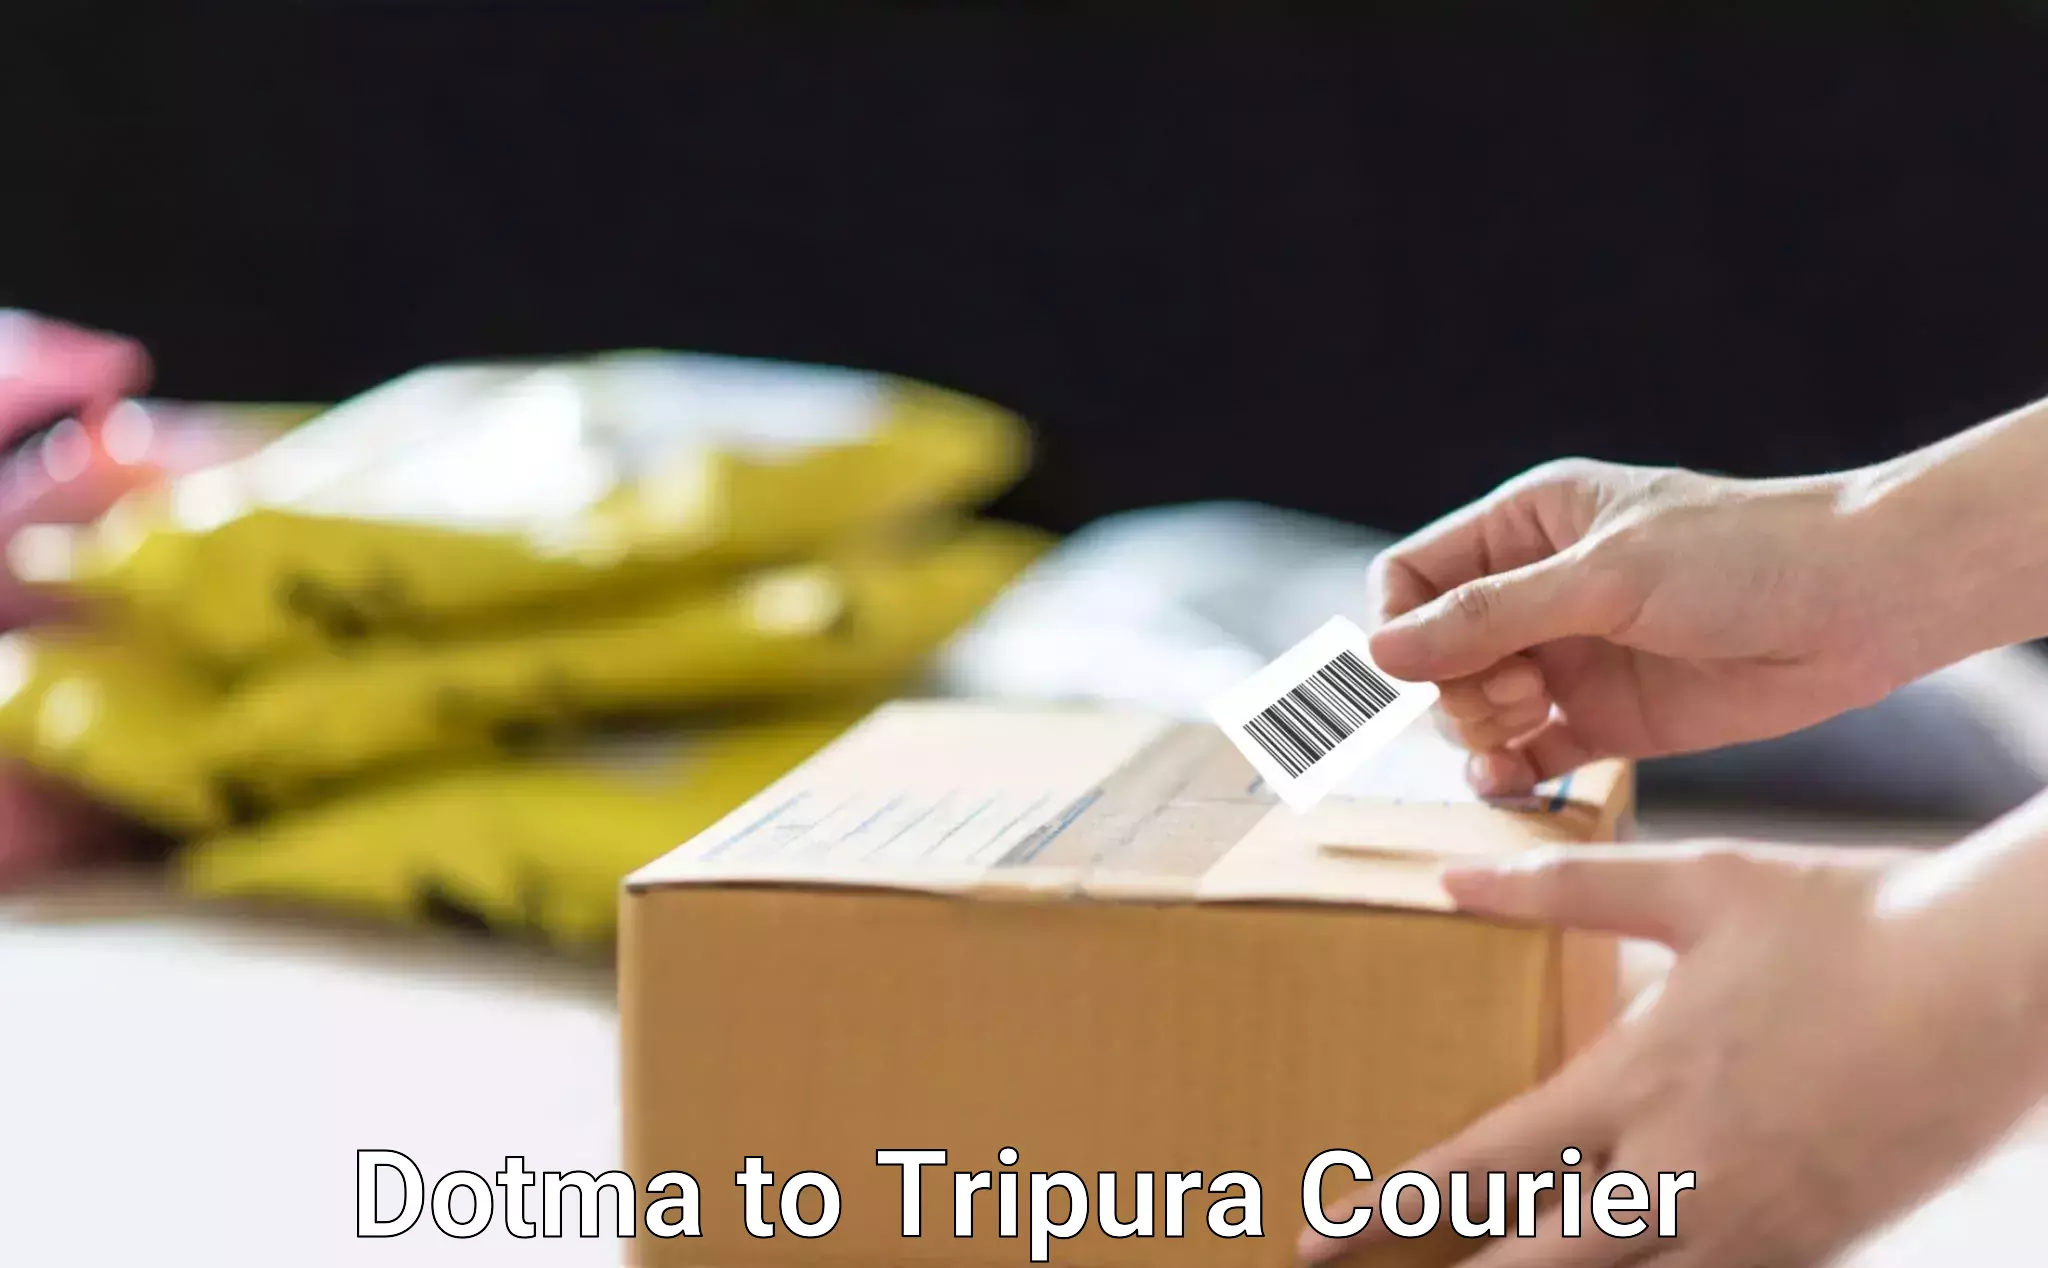 Expedited parcel delivery Dotma to Udaipur Tripura